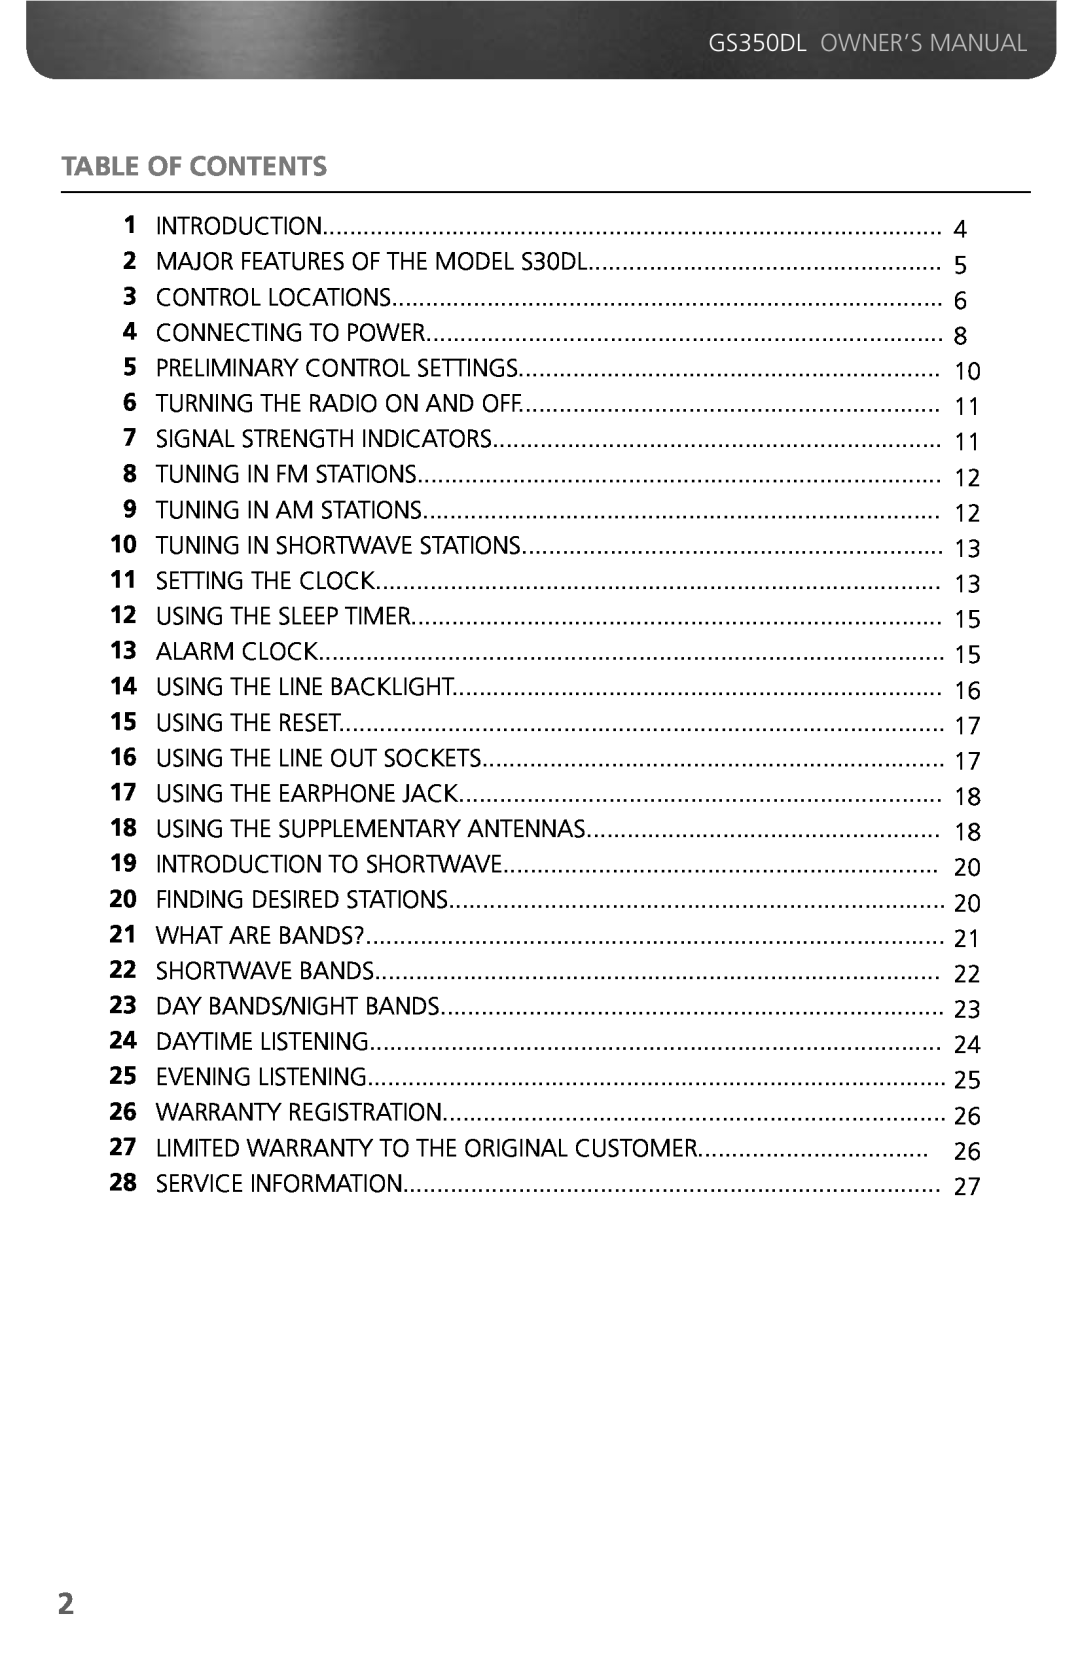 Grundig GS350DL owner manual Table Of Contents 